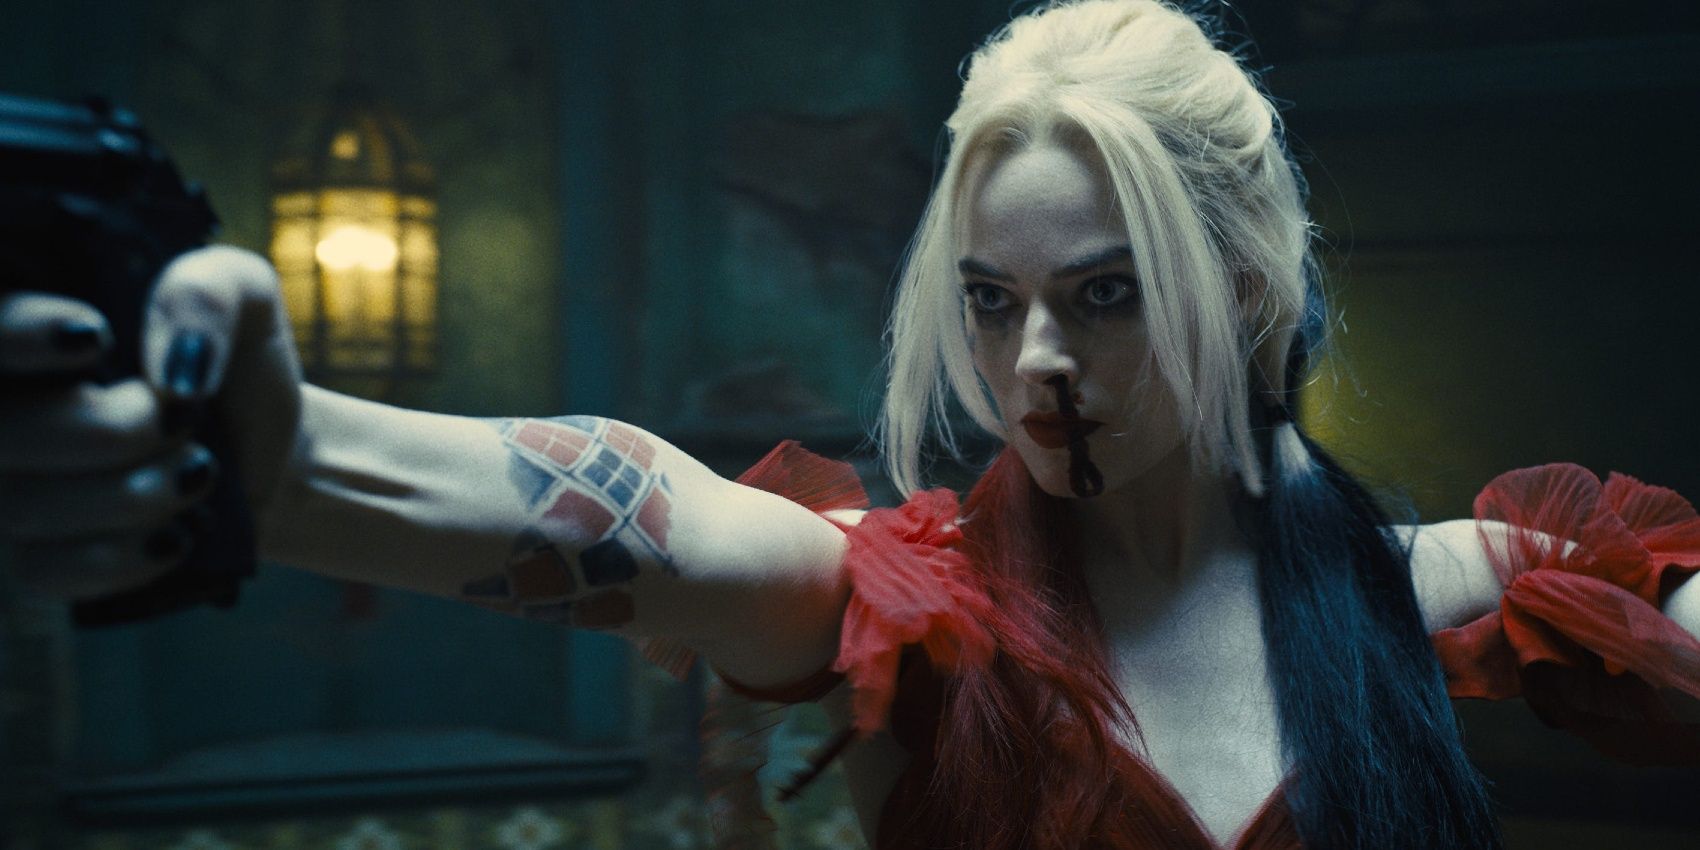 The Suicide Squad Which Character Are You Based On Your Zodiac Sign